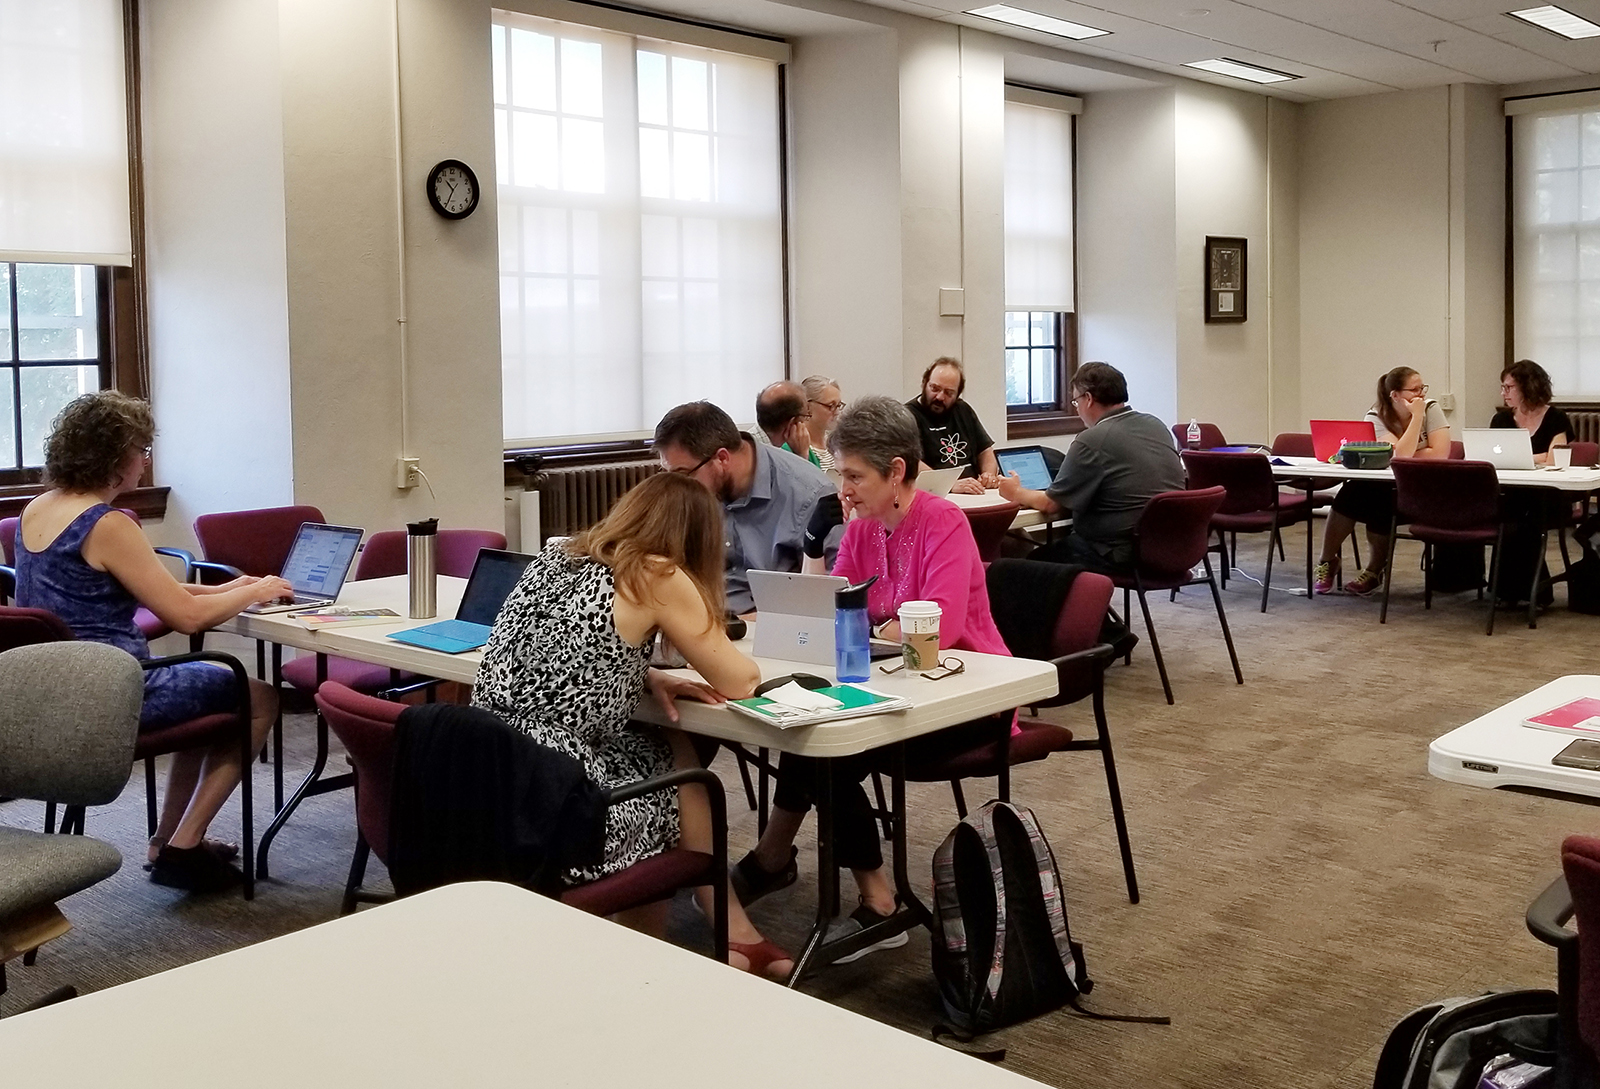 Faculty discuss ideas to enhance learning